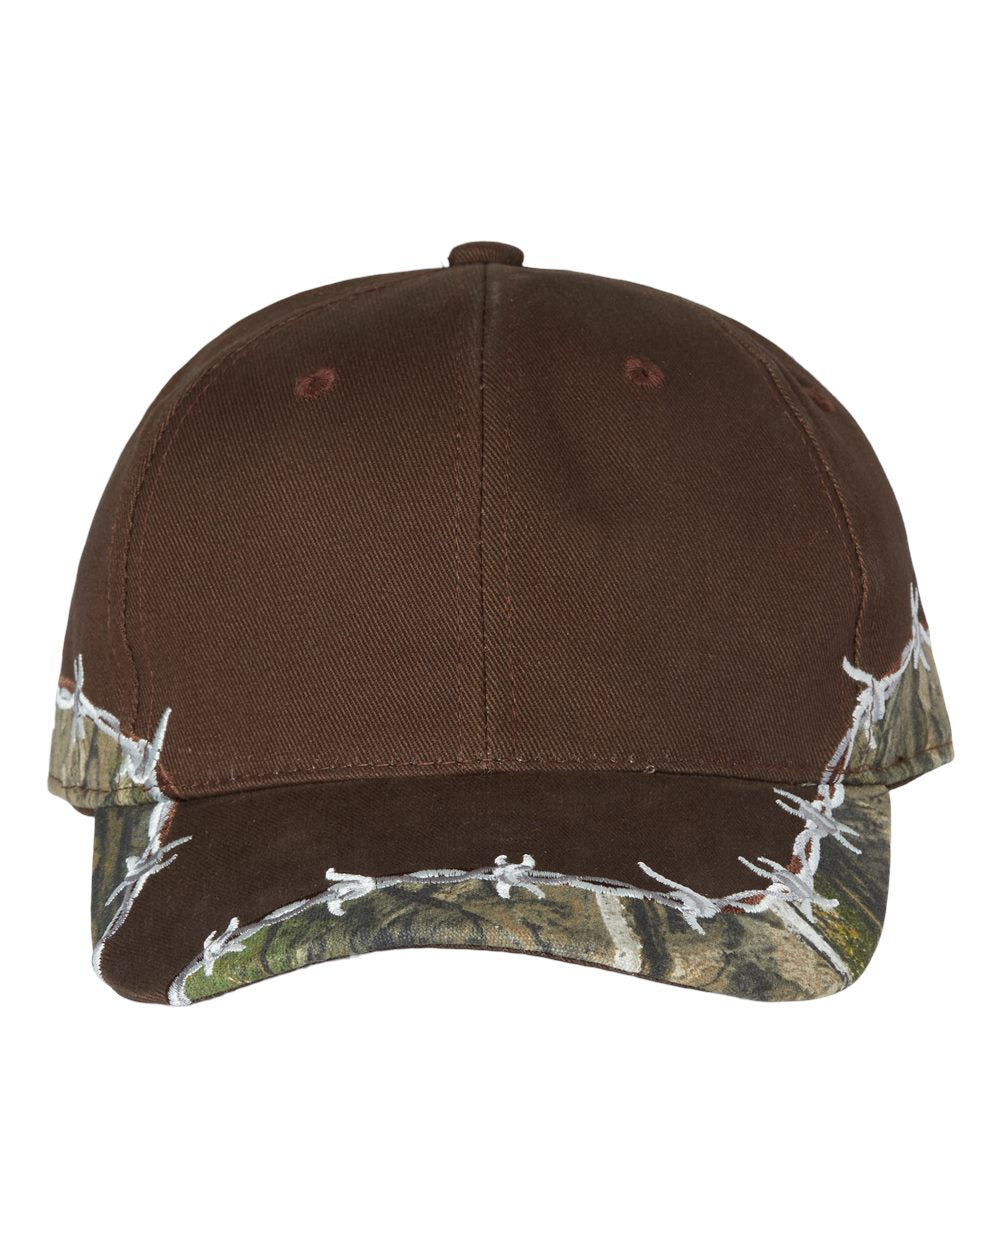  Image of the Barbed Wire Camo Cap, featuring a camouflage design with subtle barbed wire accents, ideal for outdoor activities and blending into natural environments.